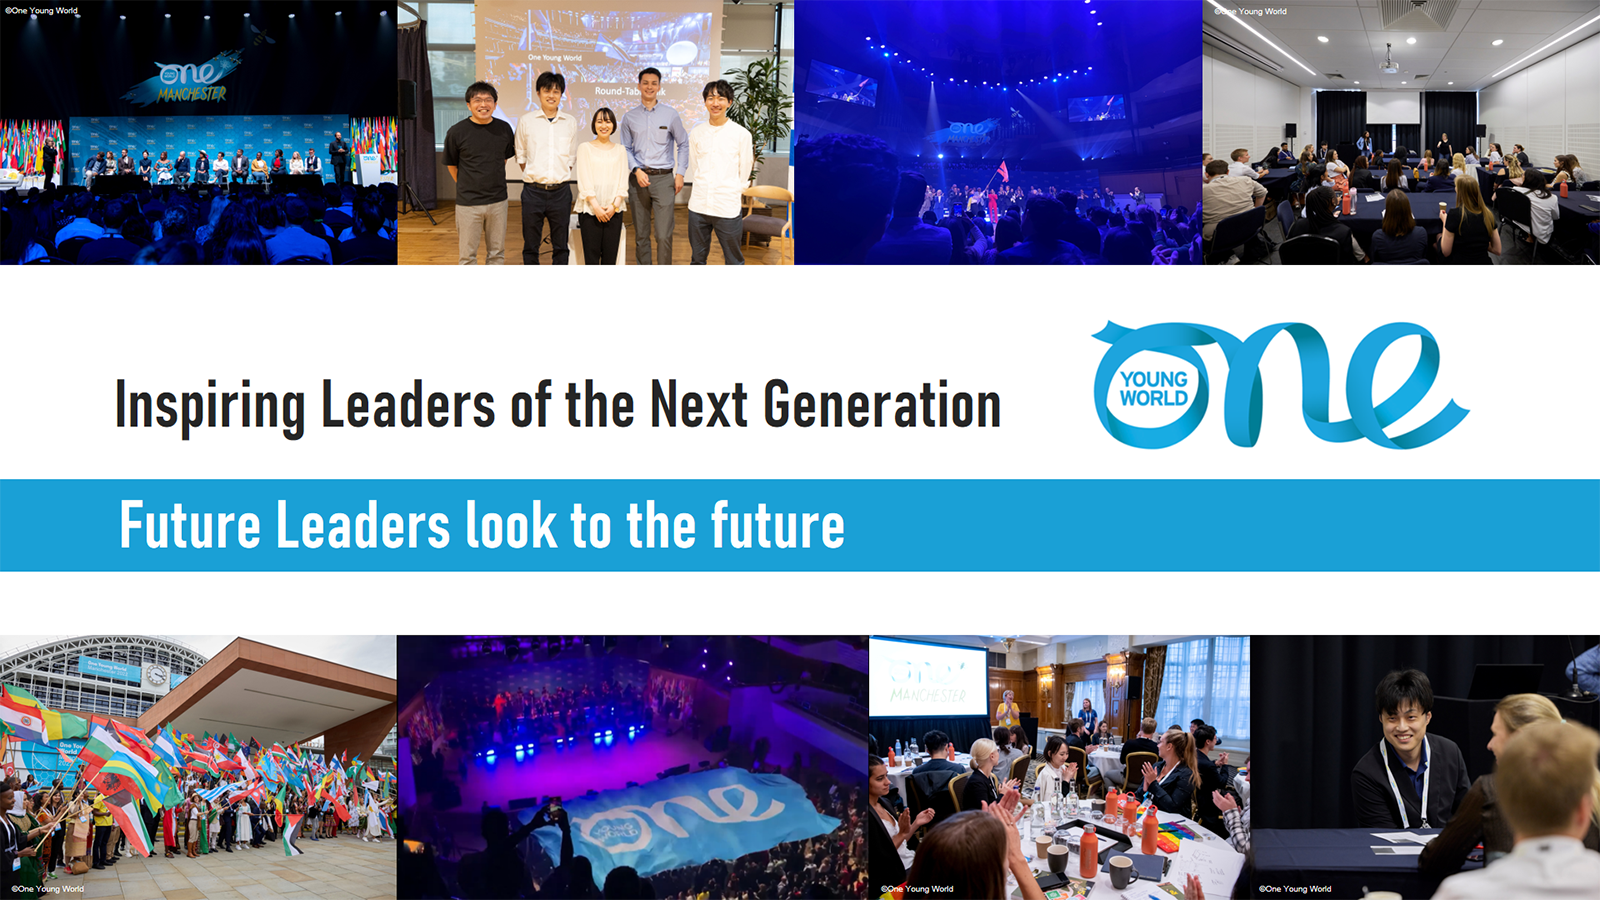 Inspiring Leaders of the Next Generation – One Young World; Future Leaders Look to the Future